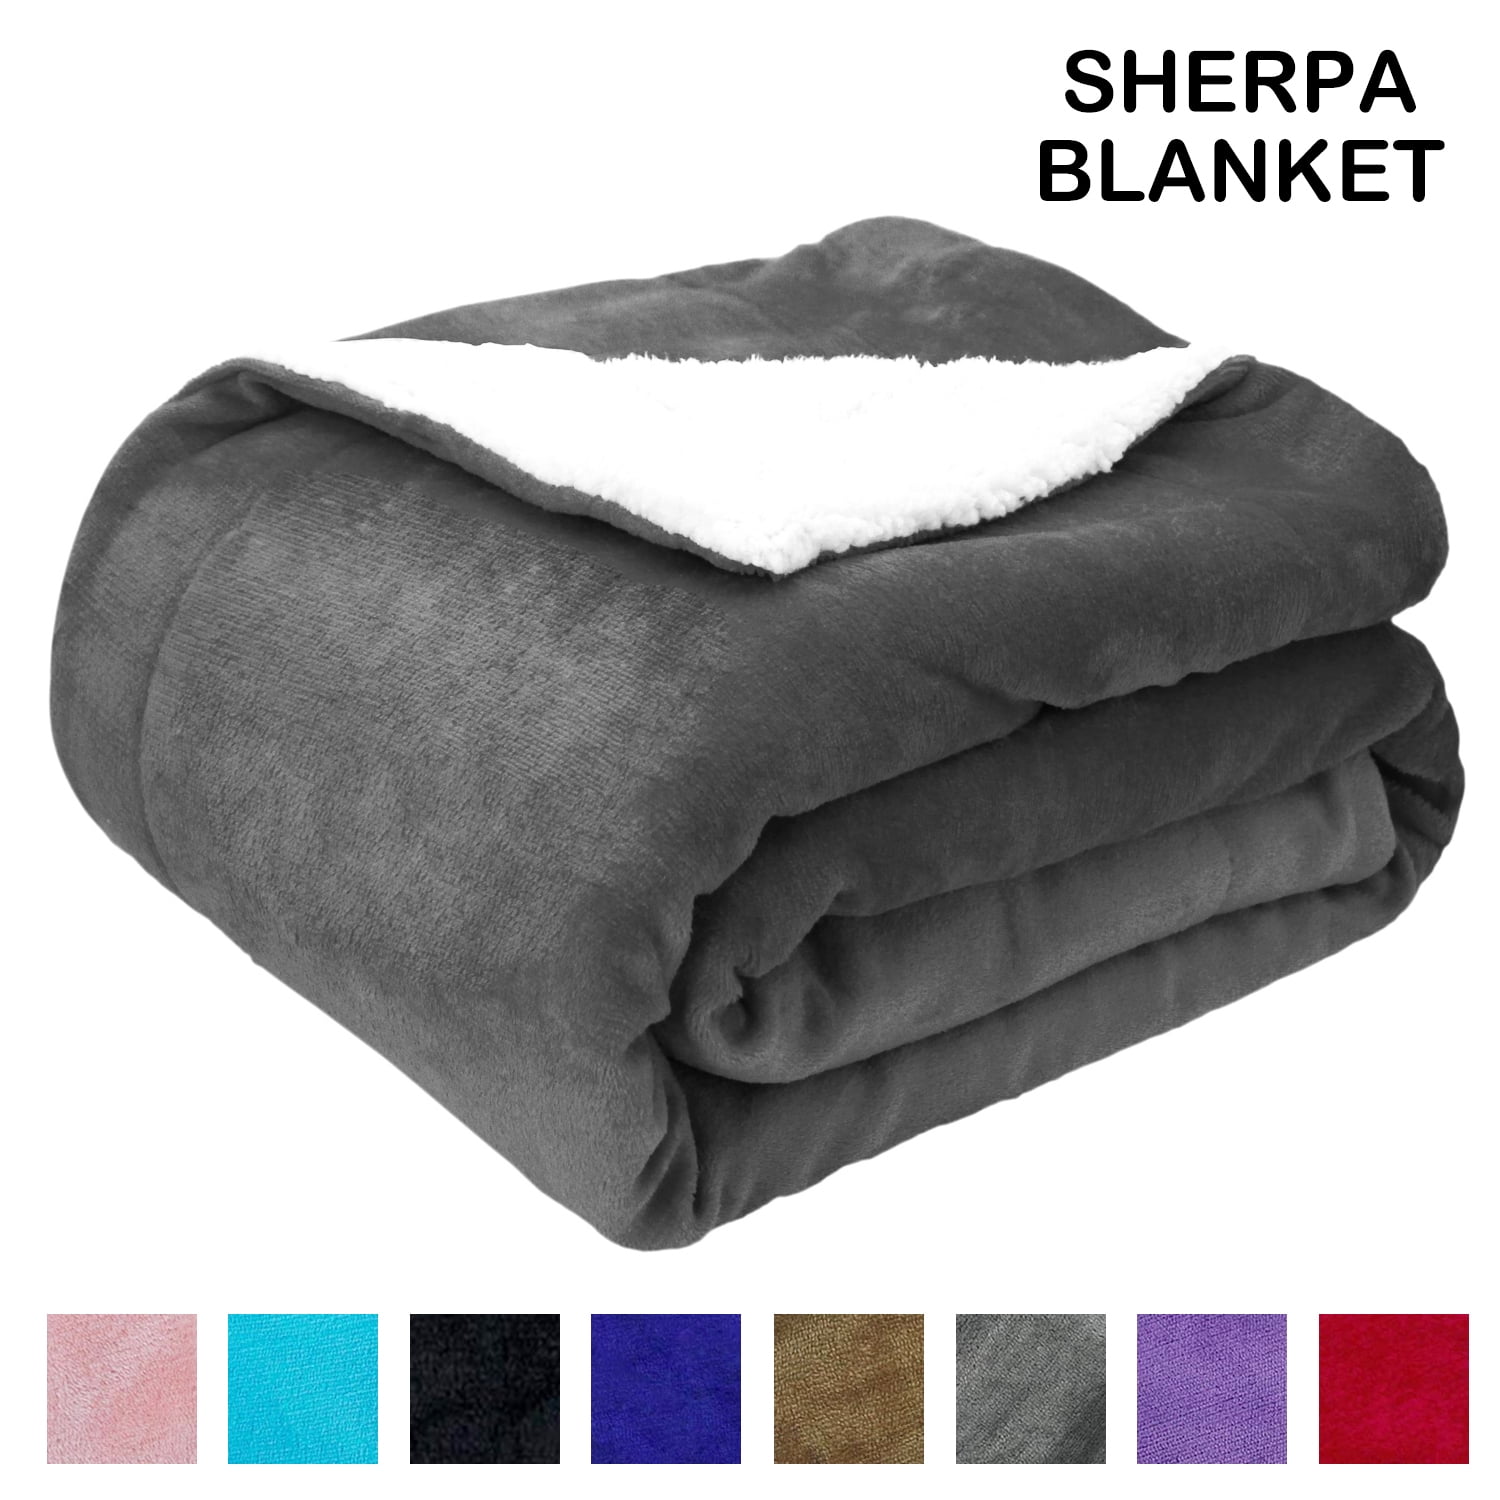 Rtizon Fuzzy Blanket for Bed, 50x60, Grey Fluffy Blankets for Teen Girls,  Sherpa Fleece Blanket for Couch, Cozy Soft Plush Throw Blanket for Sofa